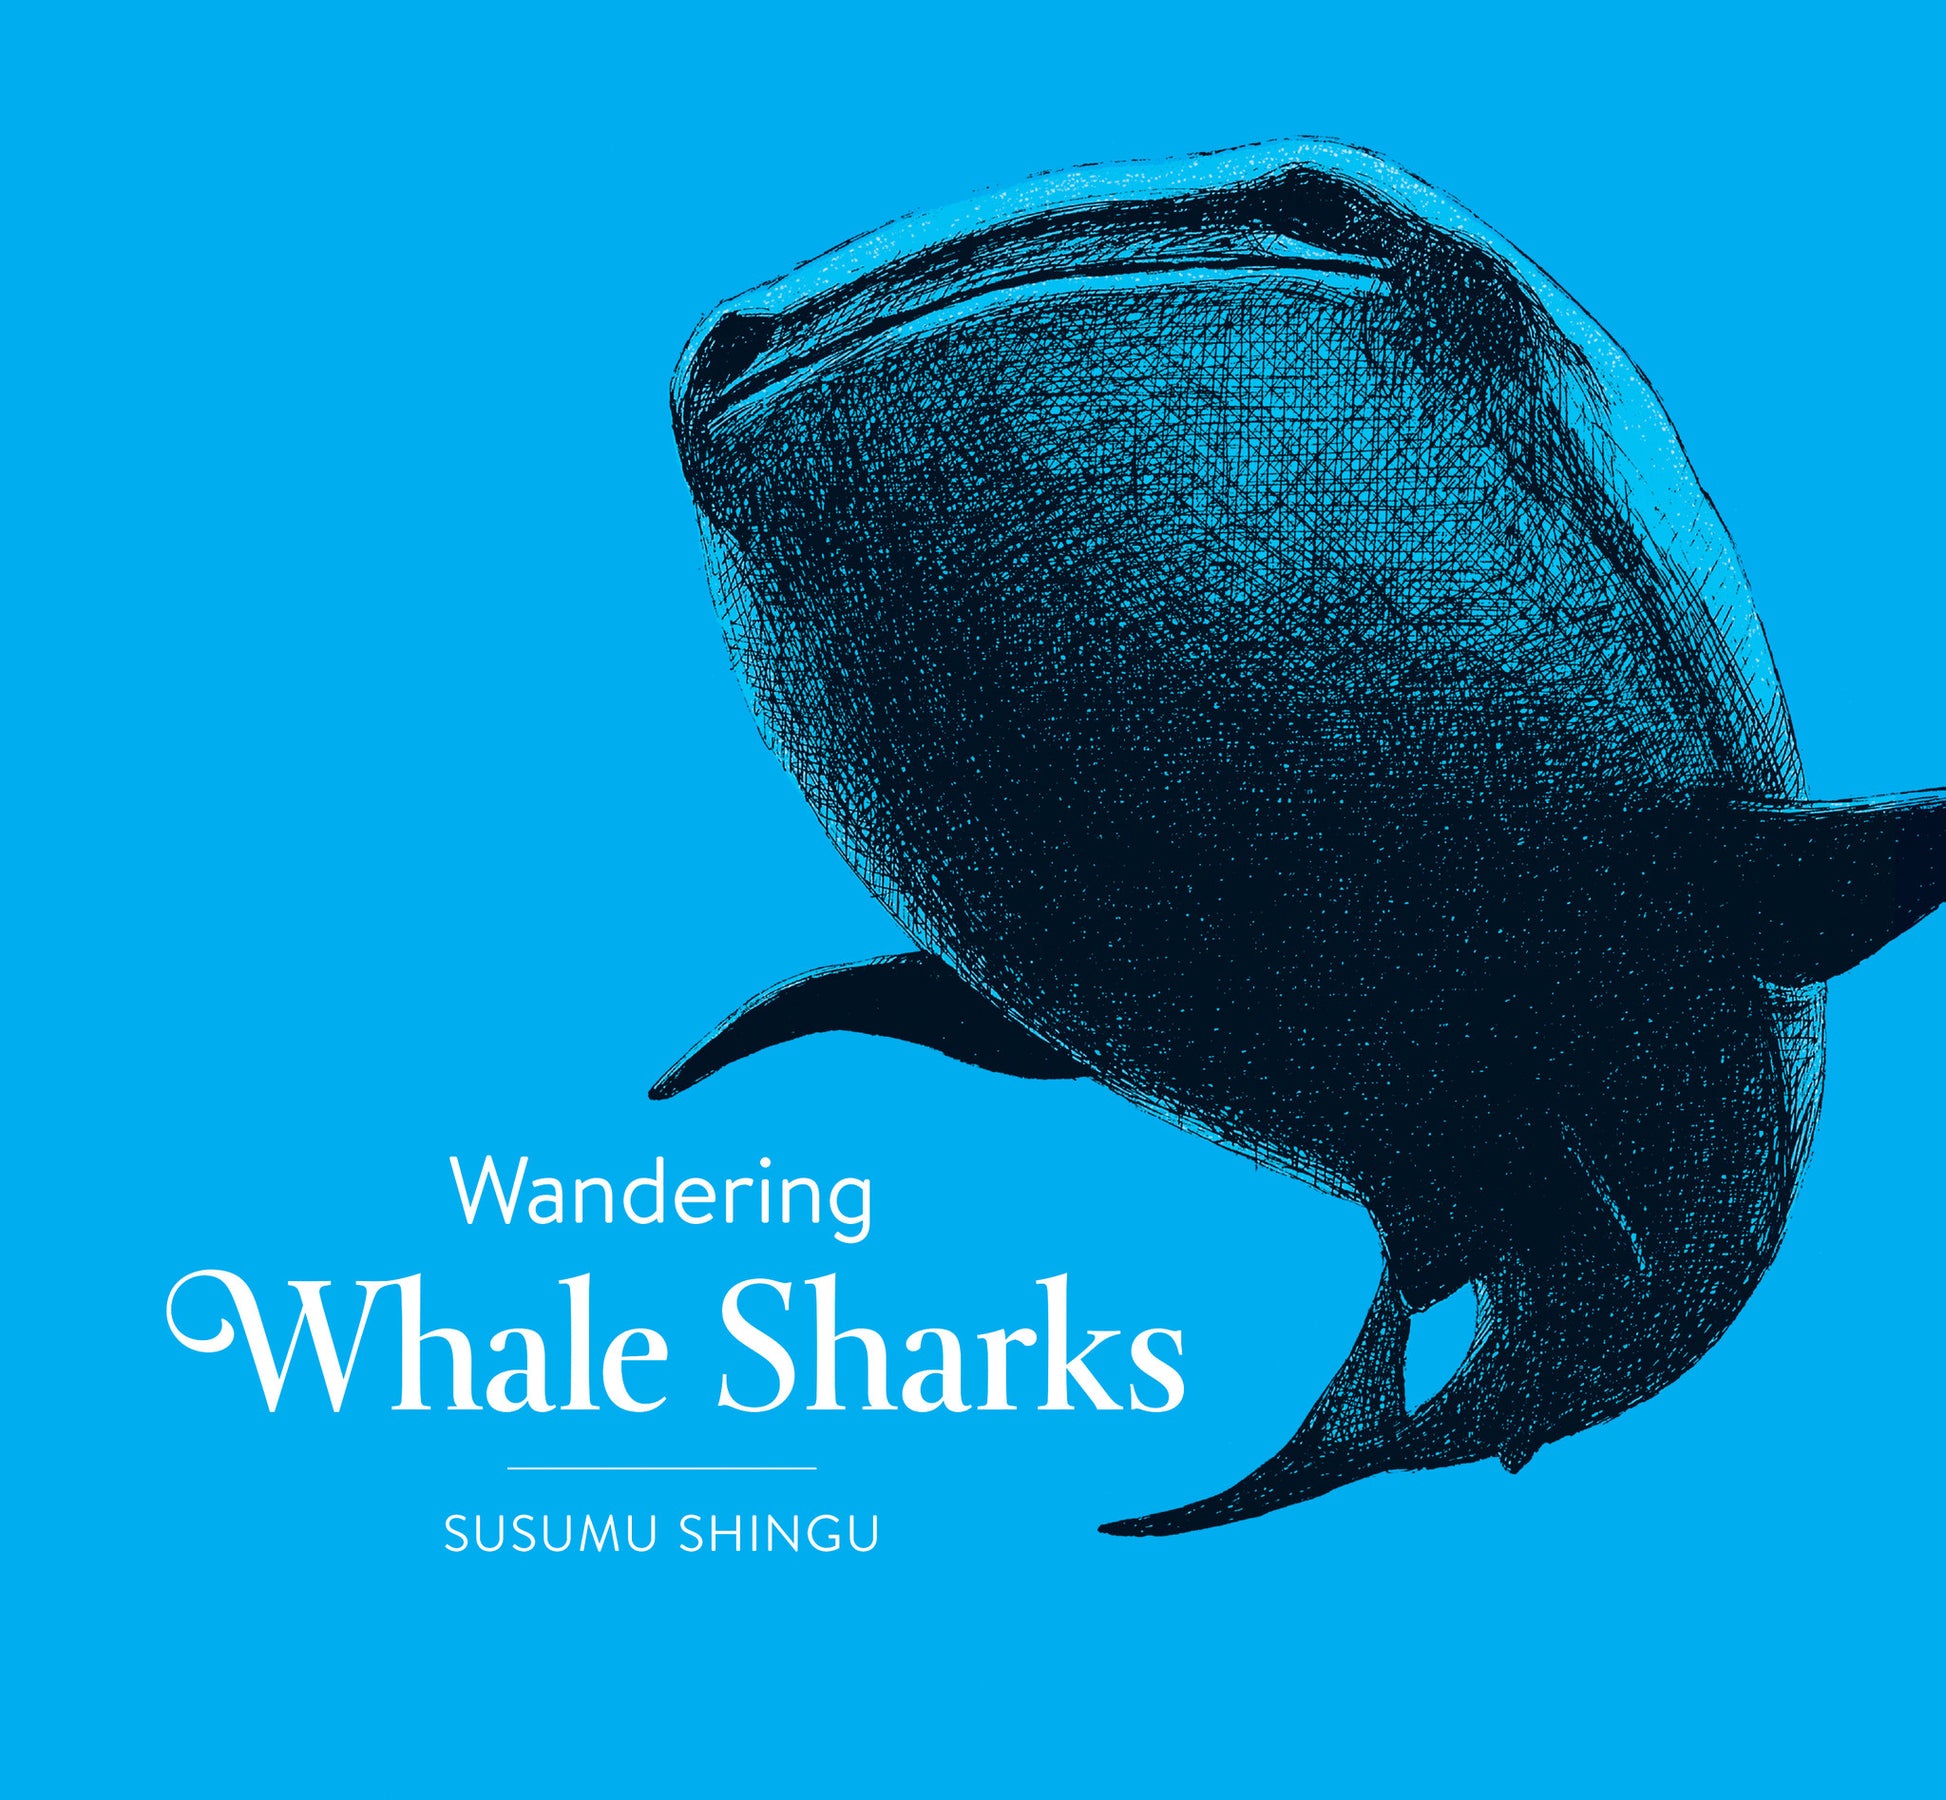 Wandering Whale Sharks - Owlkids - Reading for kids and literacy resources for parents made fun. Books helping kids to learn.